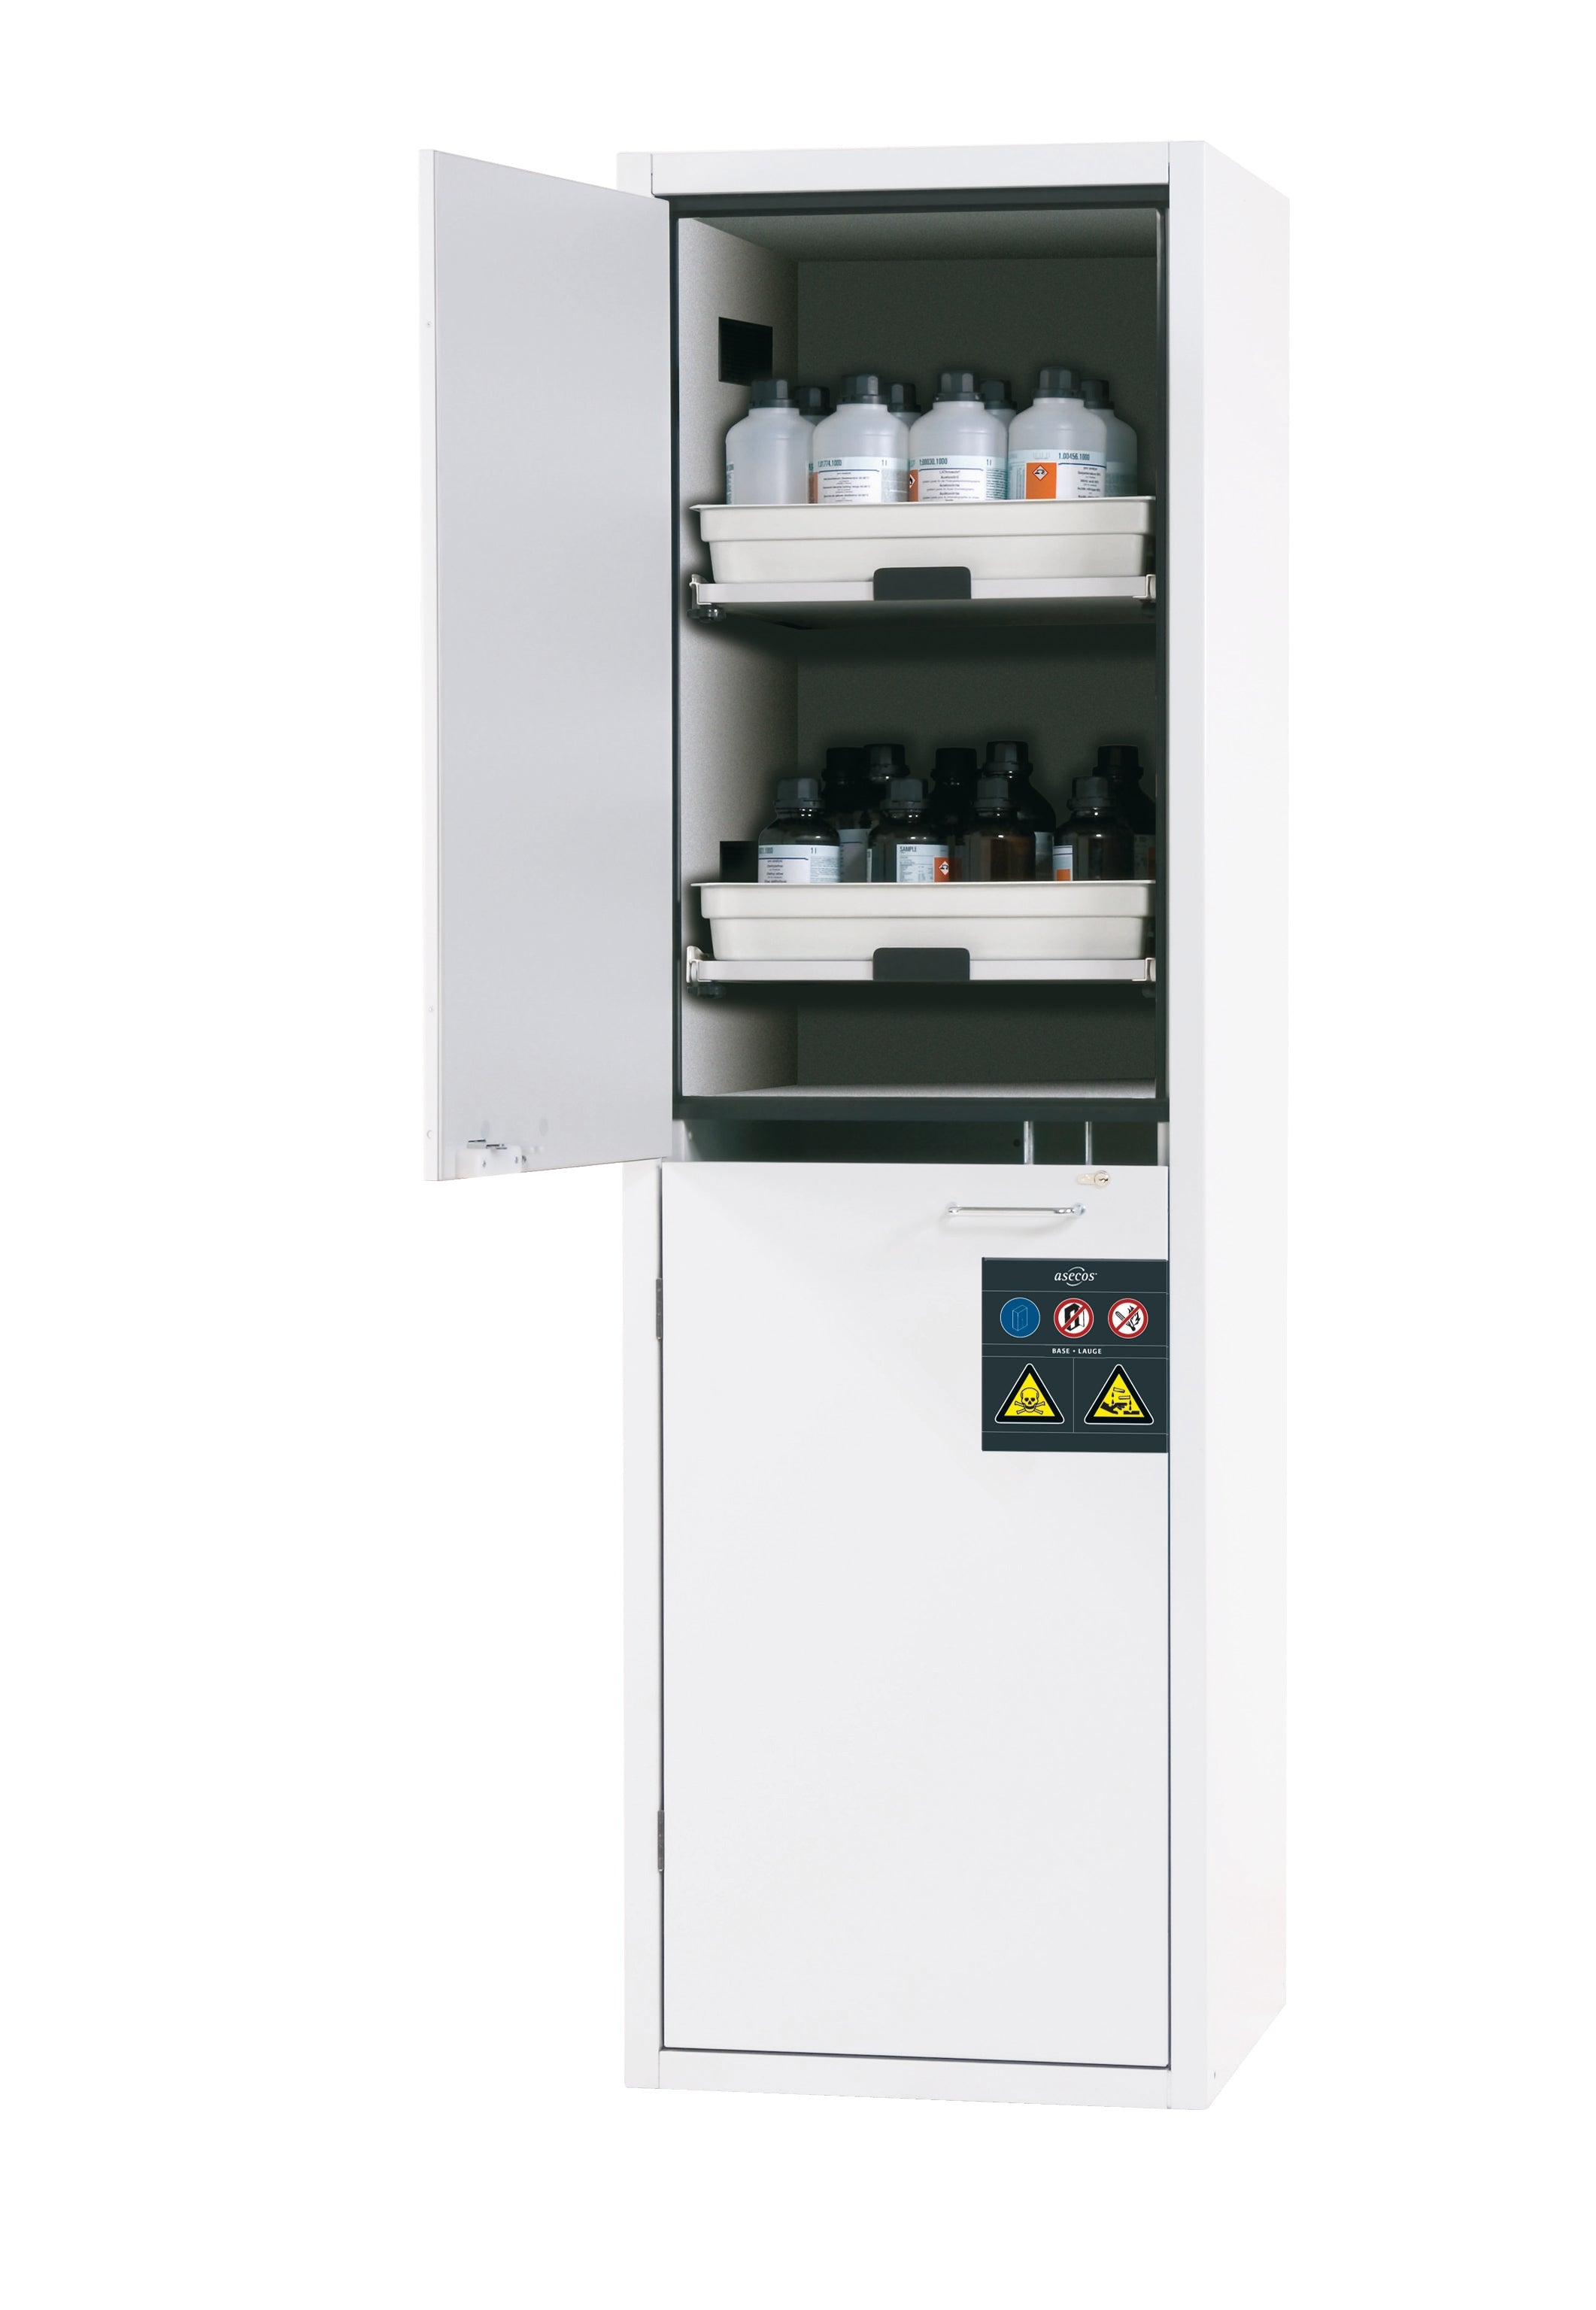 Acid and alkaline cabinet SL-CLASSIC model SL.196.060.MH.R in laboratory white (similar to RAL 9016) with 4x AbZ pull-out shelves (FP plate/polypropylene)